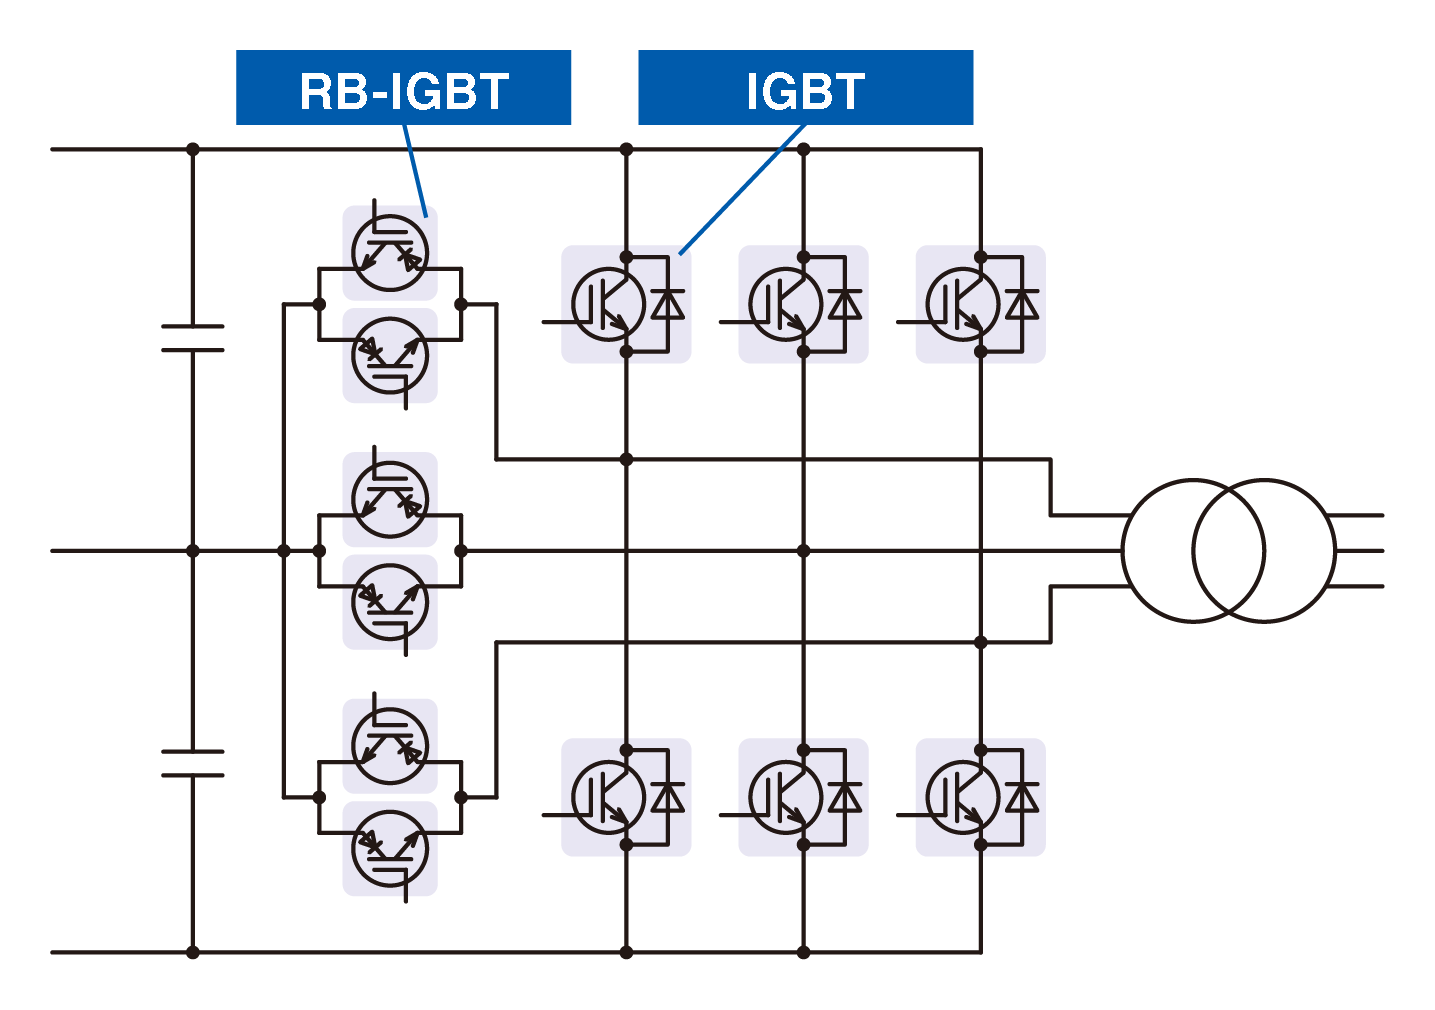 A-NPC 3-level with RB-IGBT conversion circuit example